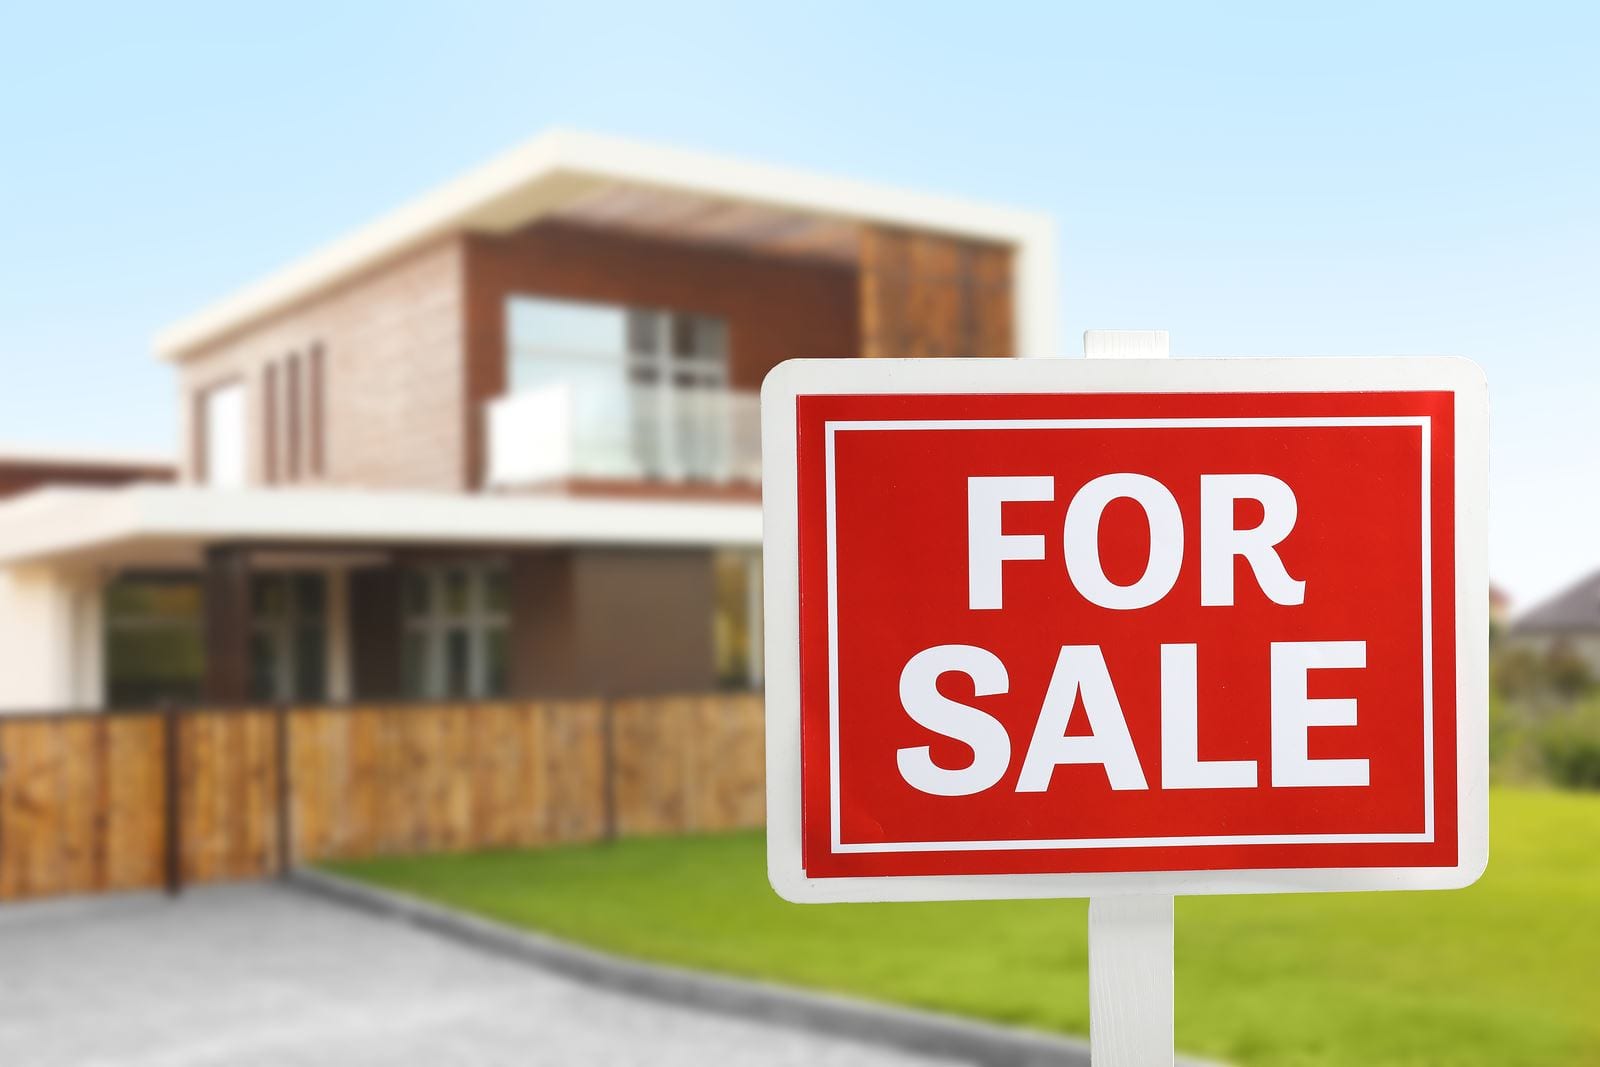 How To Find Investment Properties For Sale